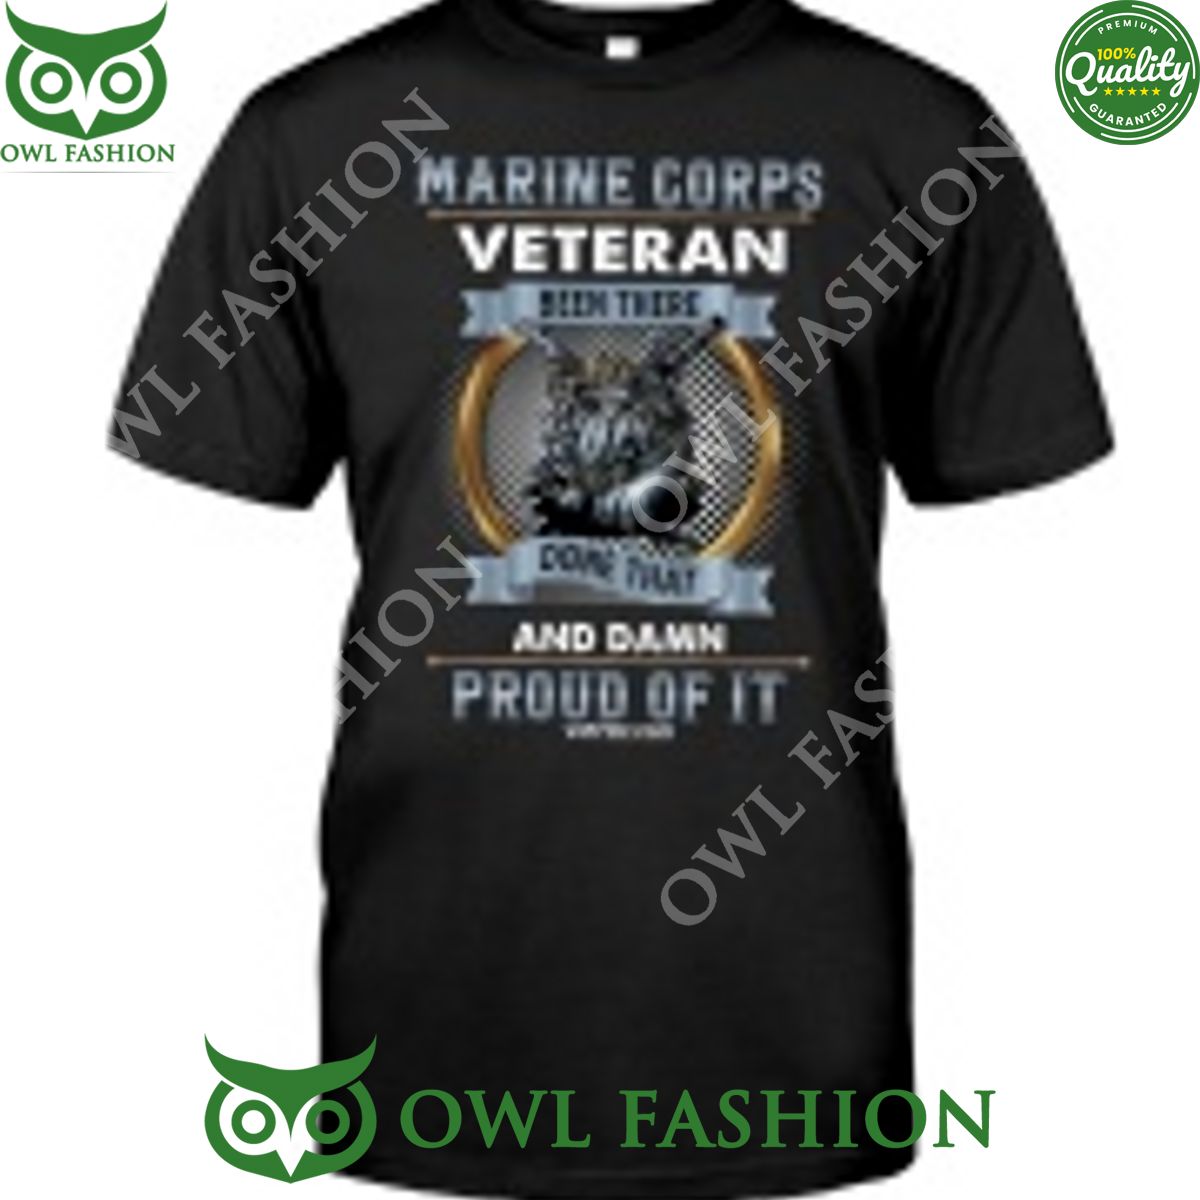 Marine Corps Veteran Been there done that damn proud of it t shirt trending